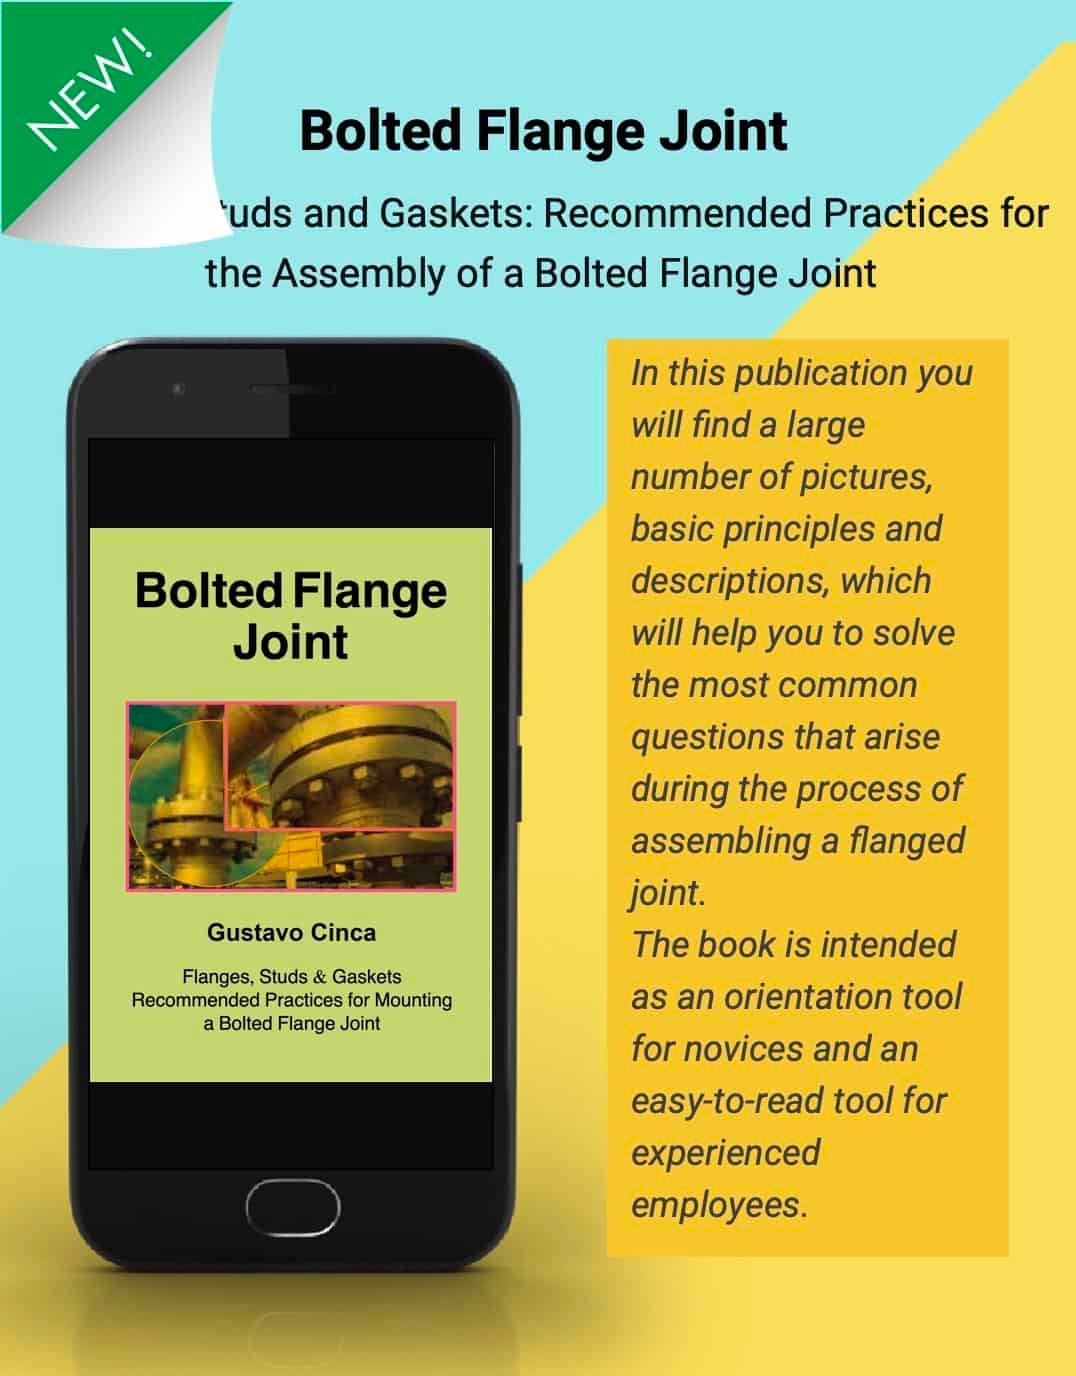 The figure displays a booklet with the cover and a brief description of the book: Bolted Flange Joint